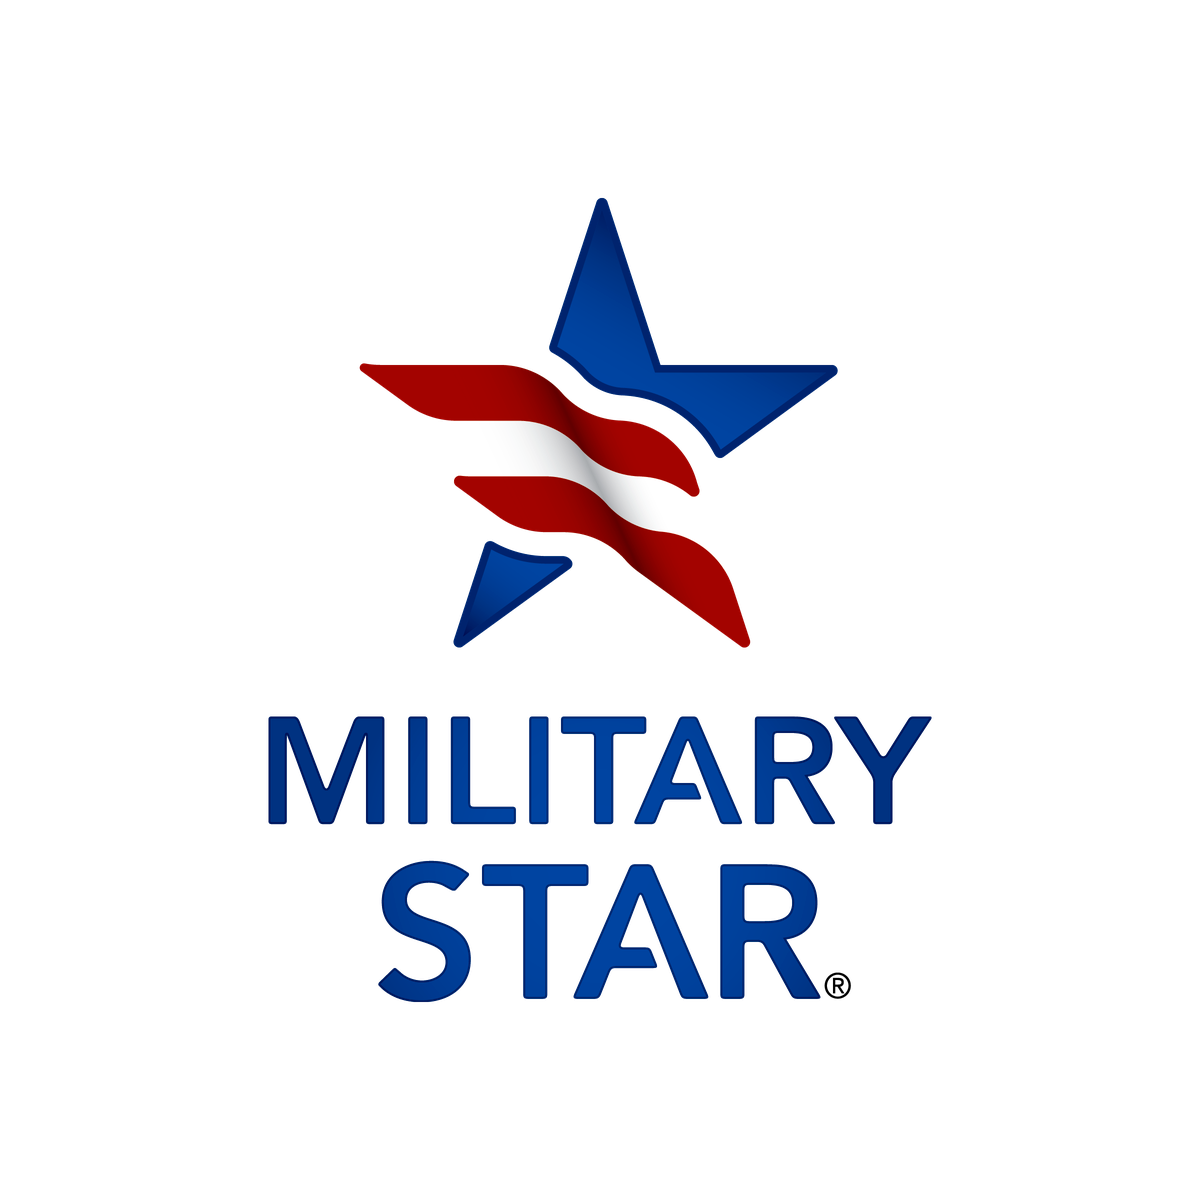 Summer Fun! Save on Your Next Vacation with MILITARY STAR